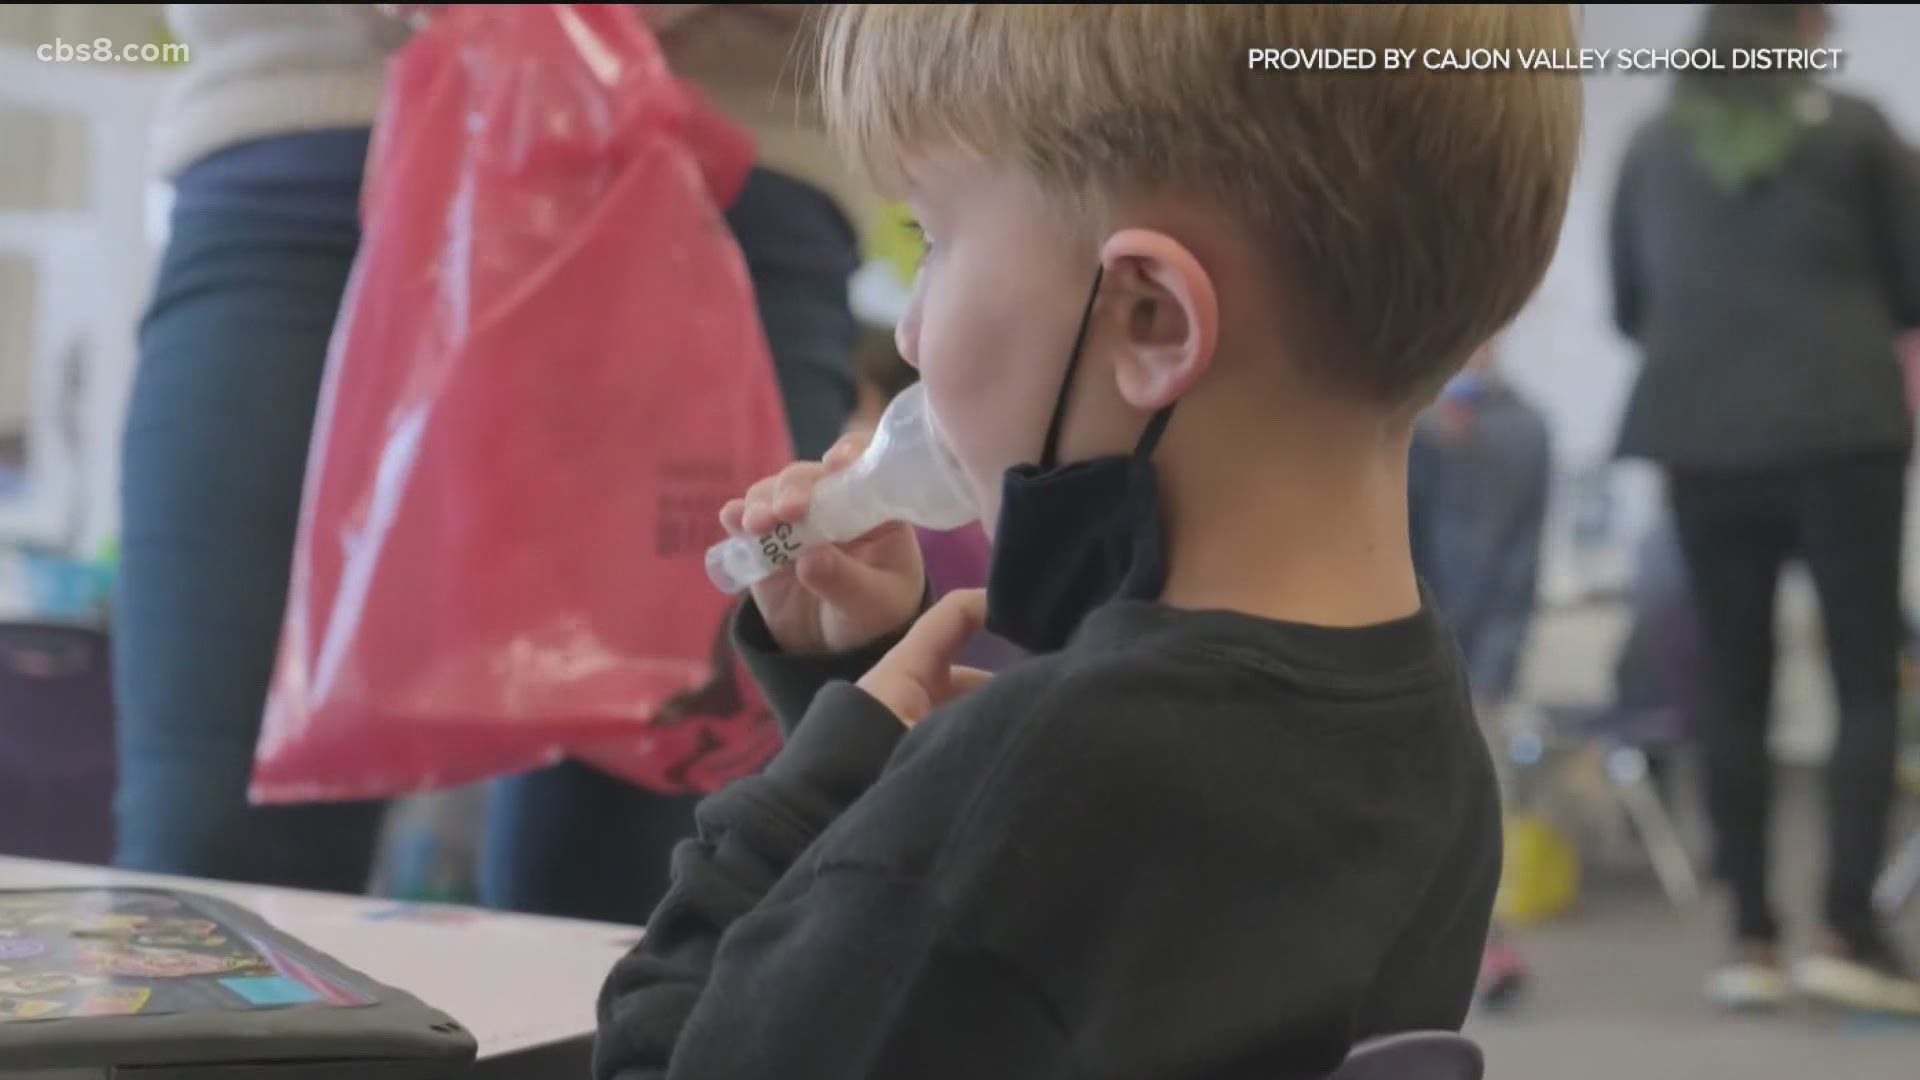 Rios Elementary is participating in a bi-weekly pilot program that relies on student saliva samples to test for the virus, with results back the same day.